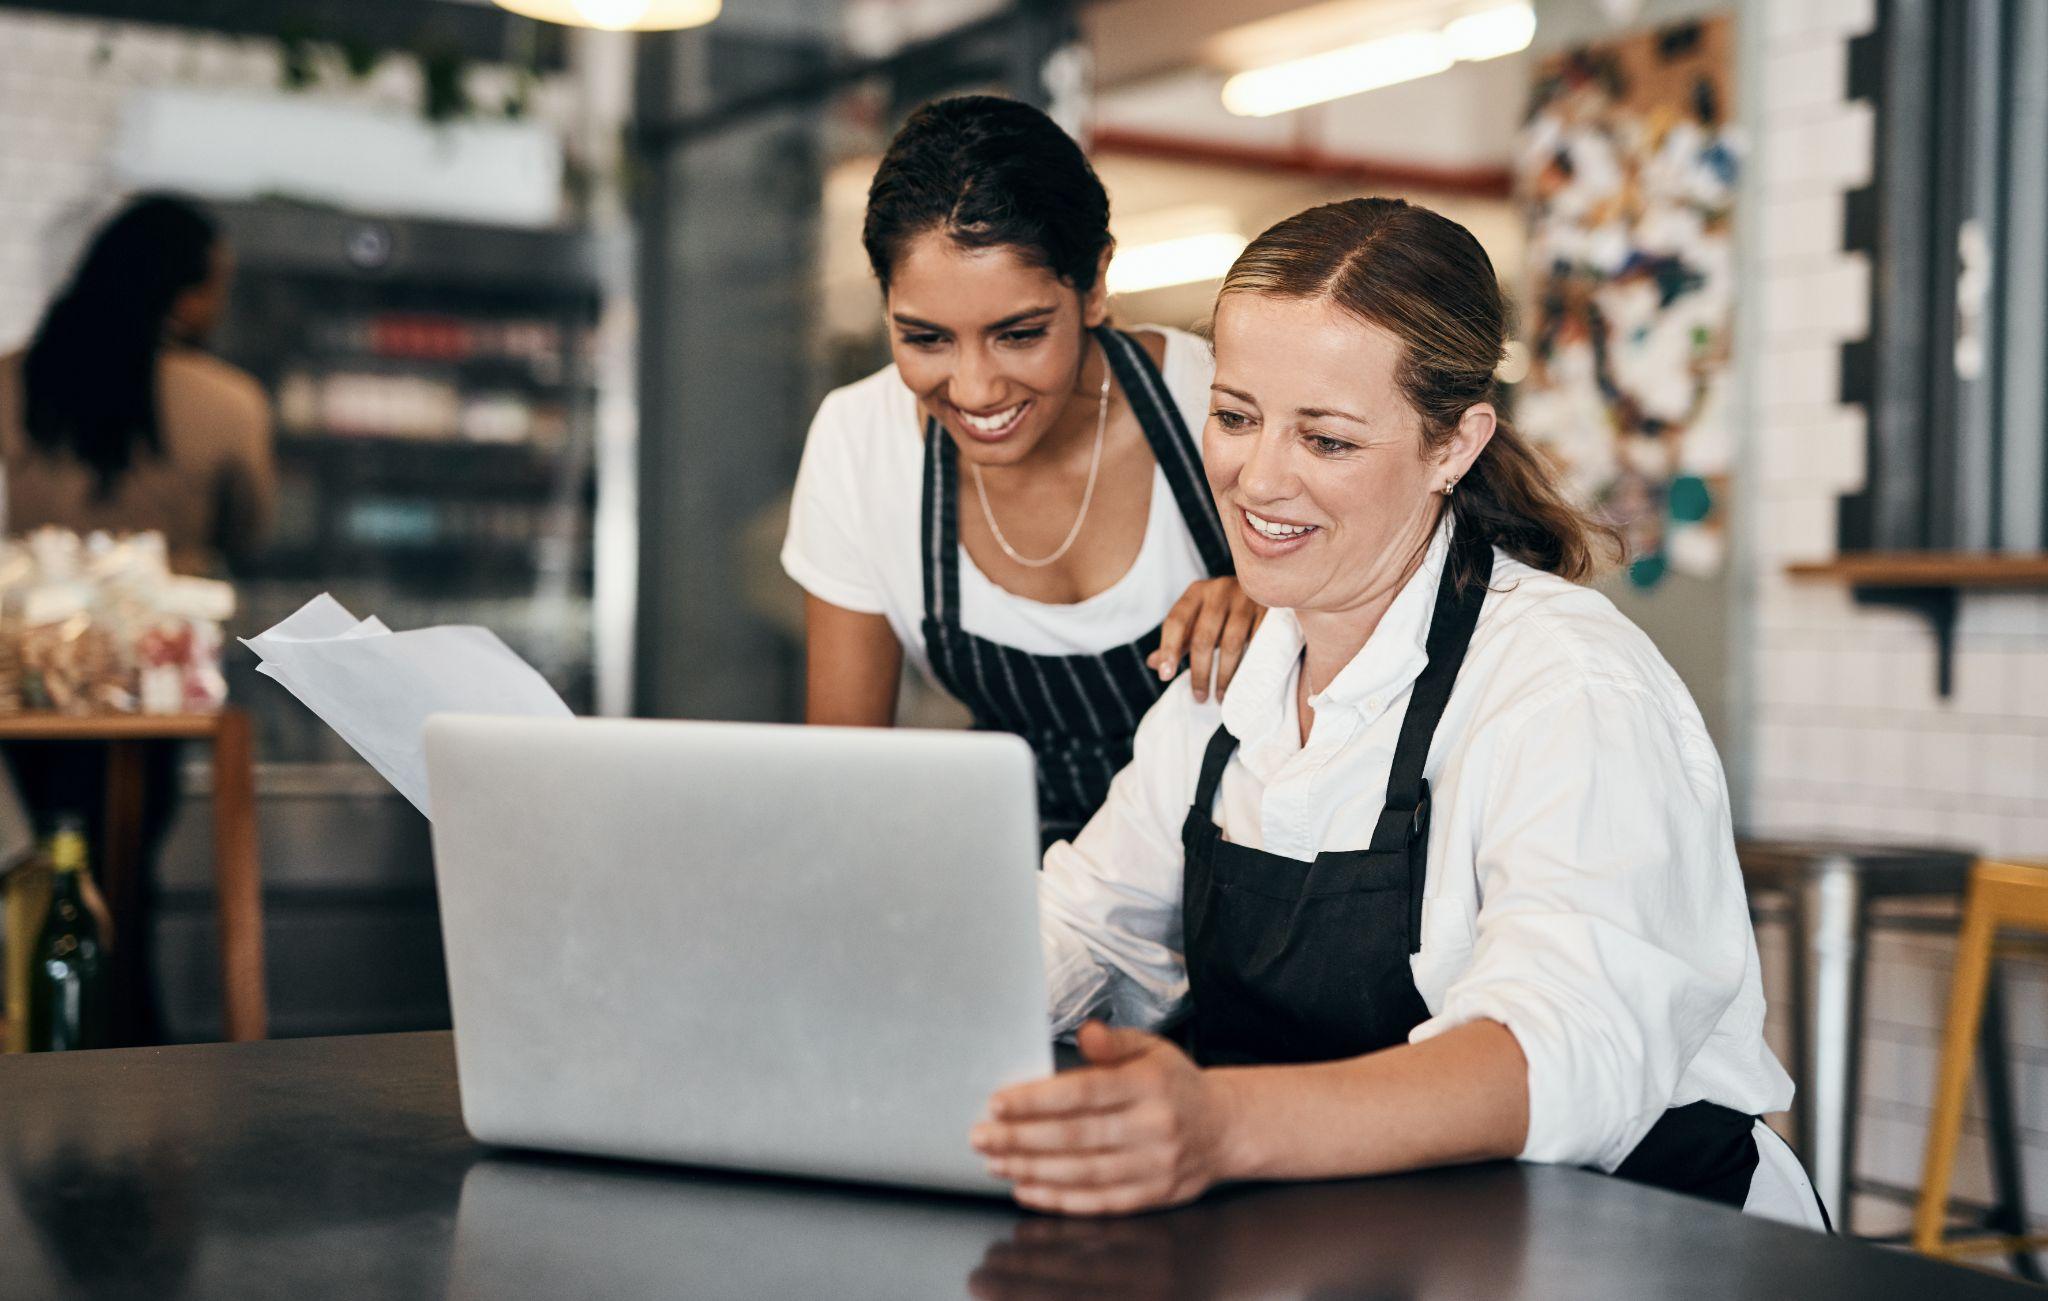 Restaurant owners using ReviewInc's online  review management software